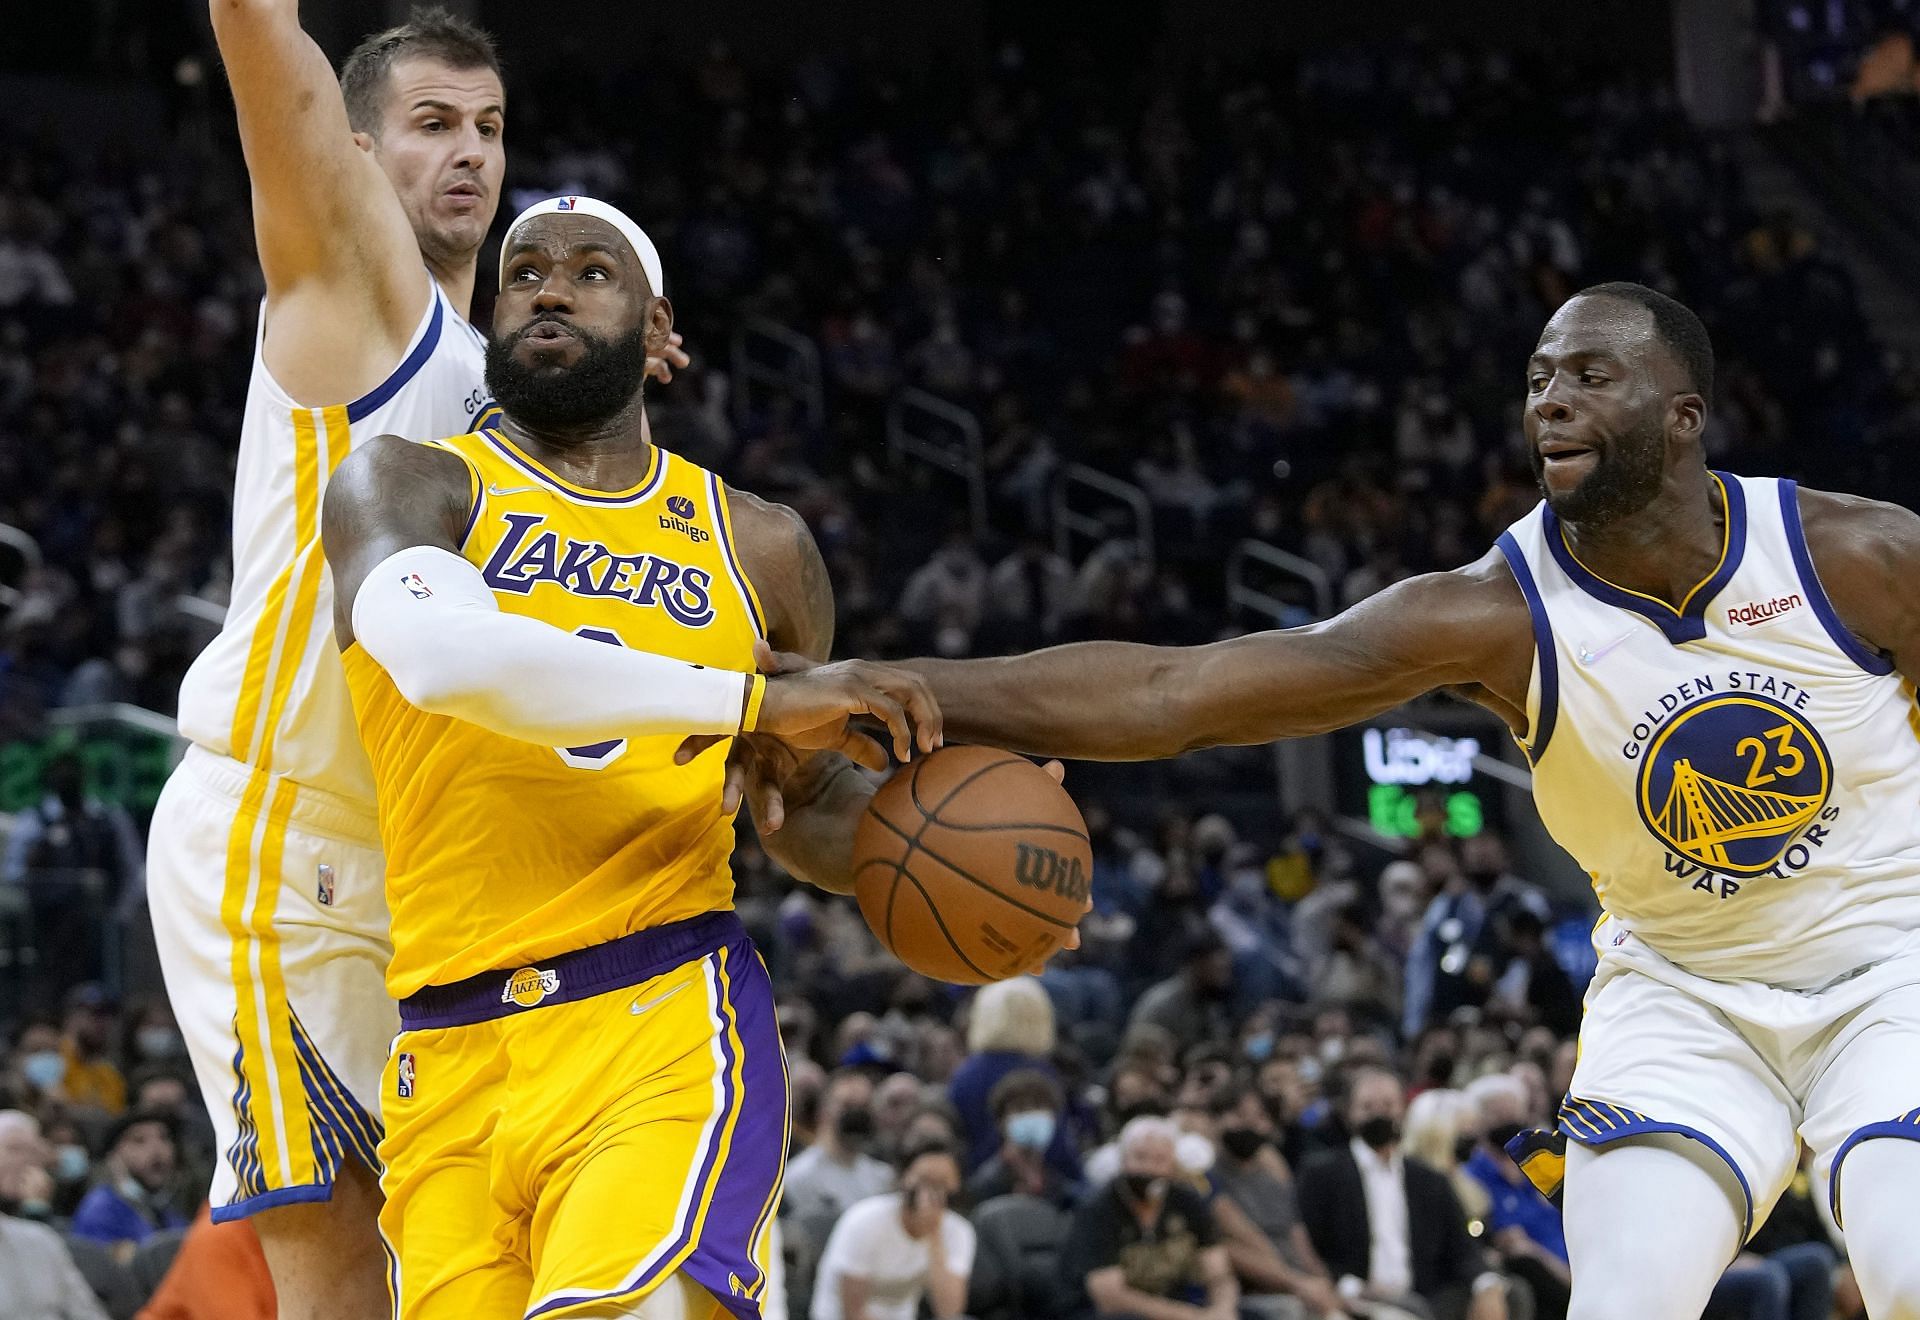 LA Lakers superstar LeBron James is entering Year 19 in the NBA